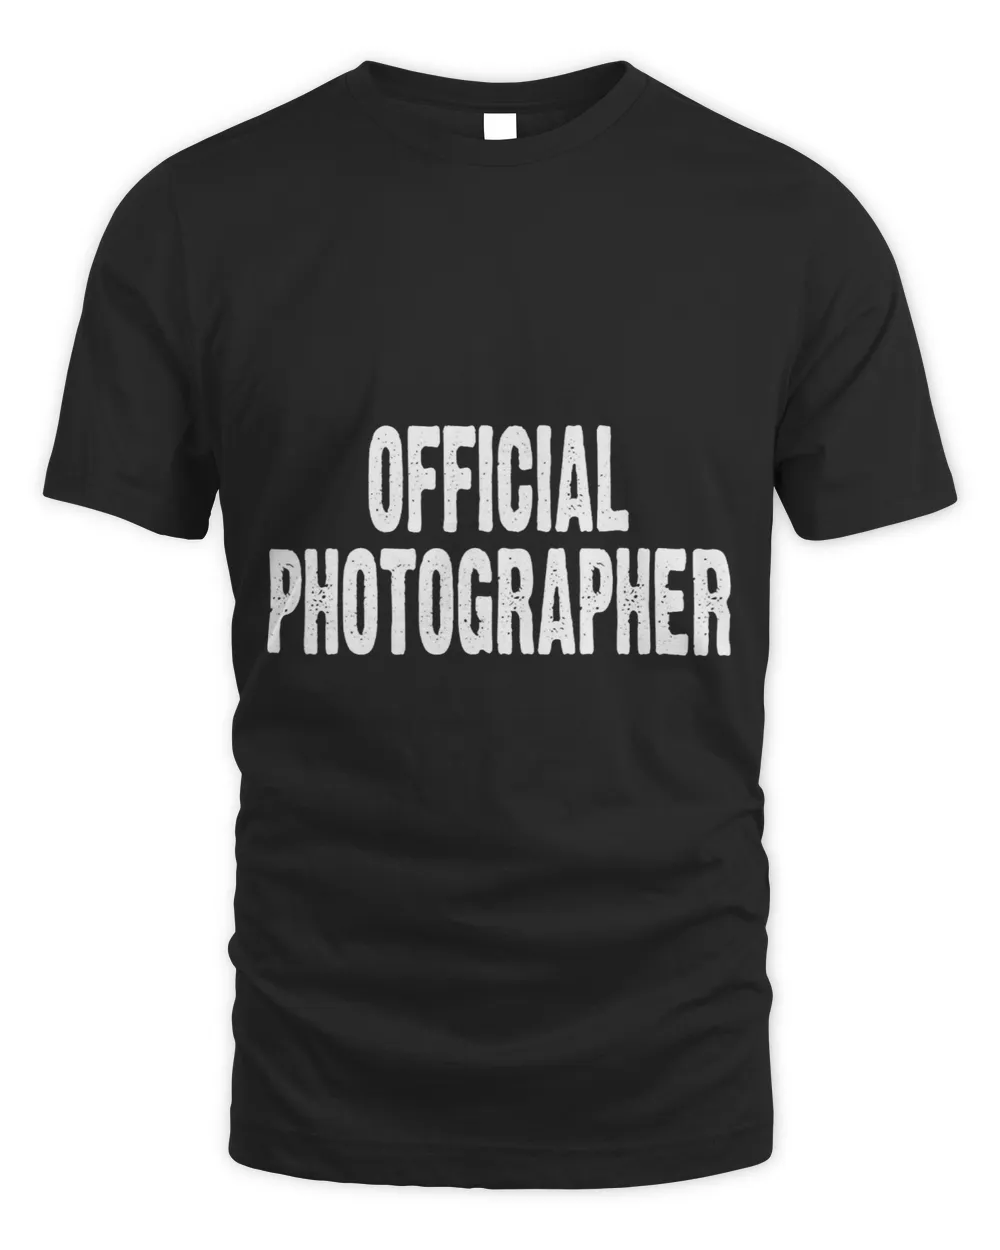 Official Photographer Event Photography 28